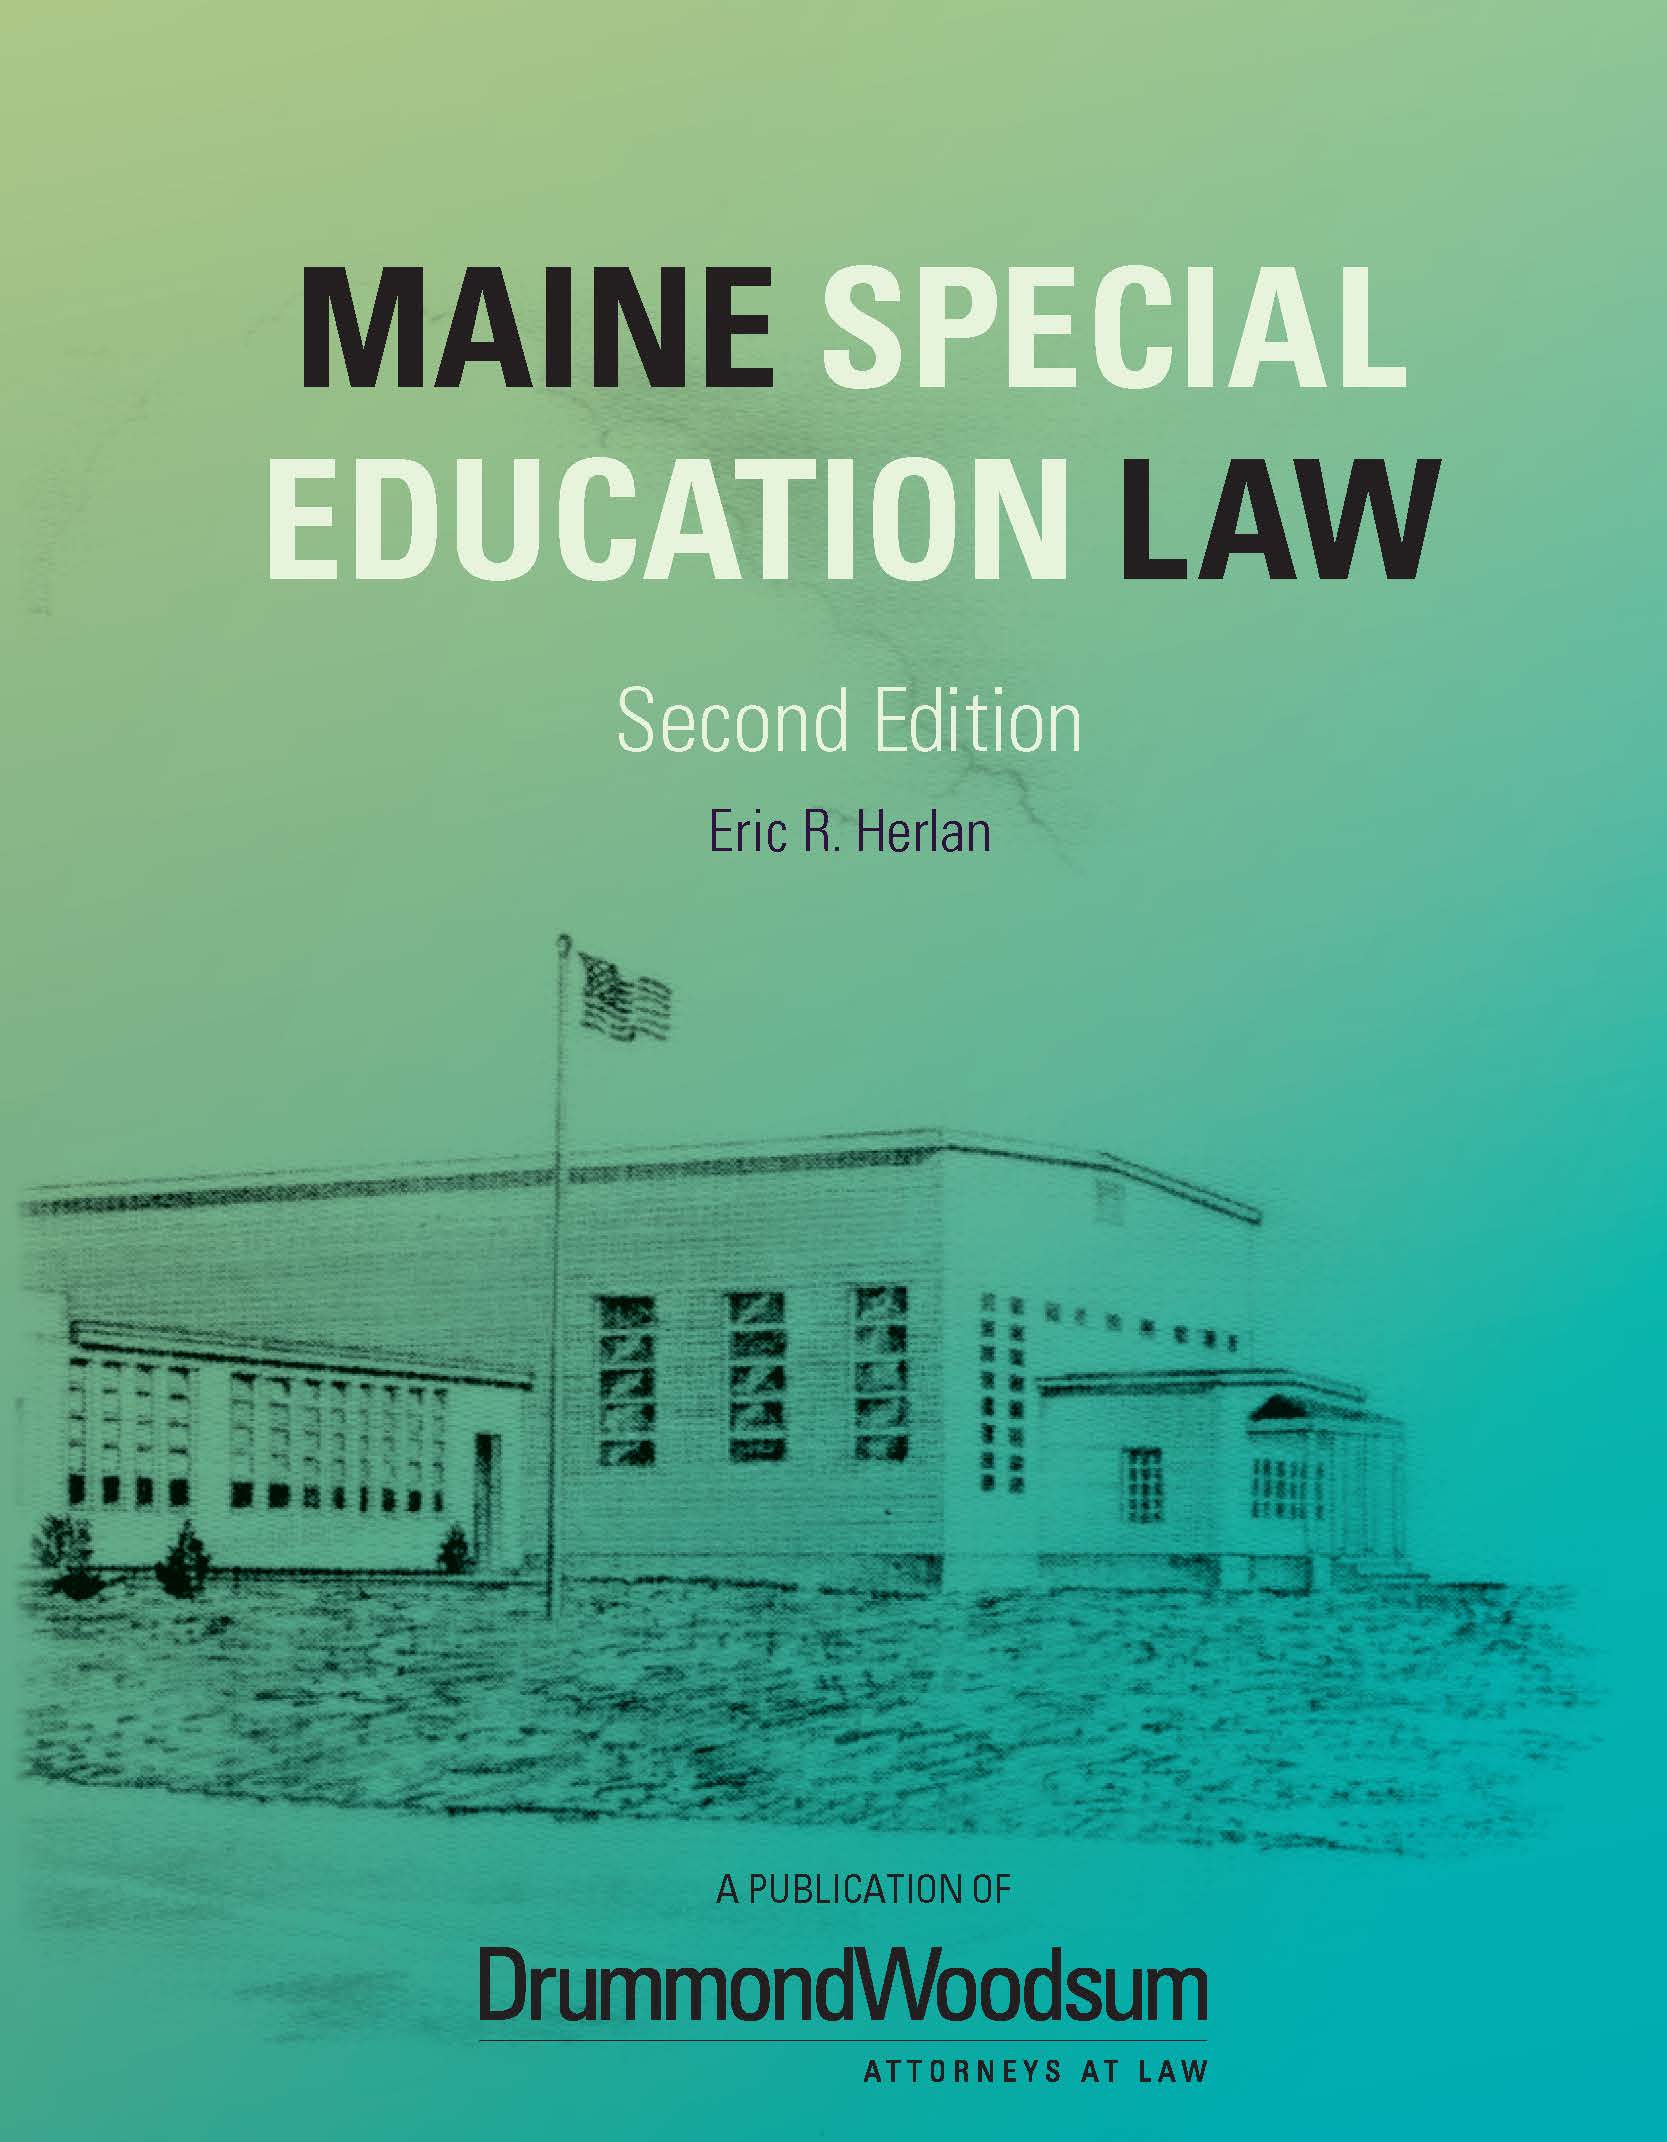 special education law articles